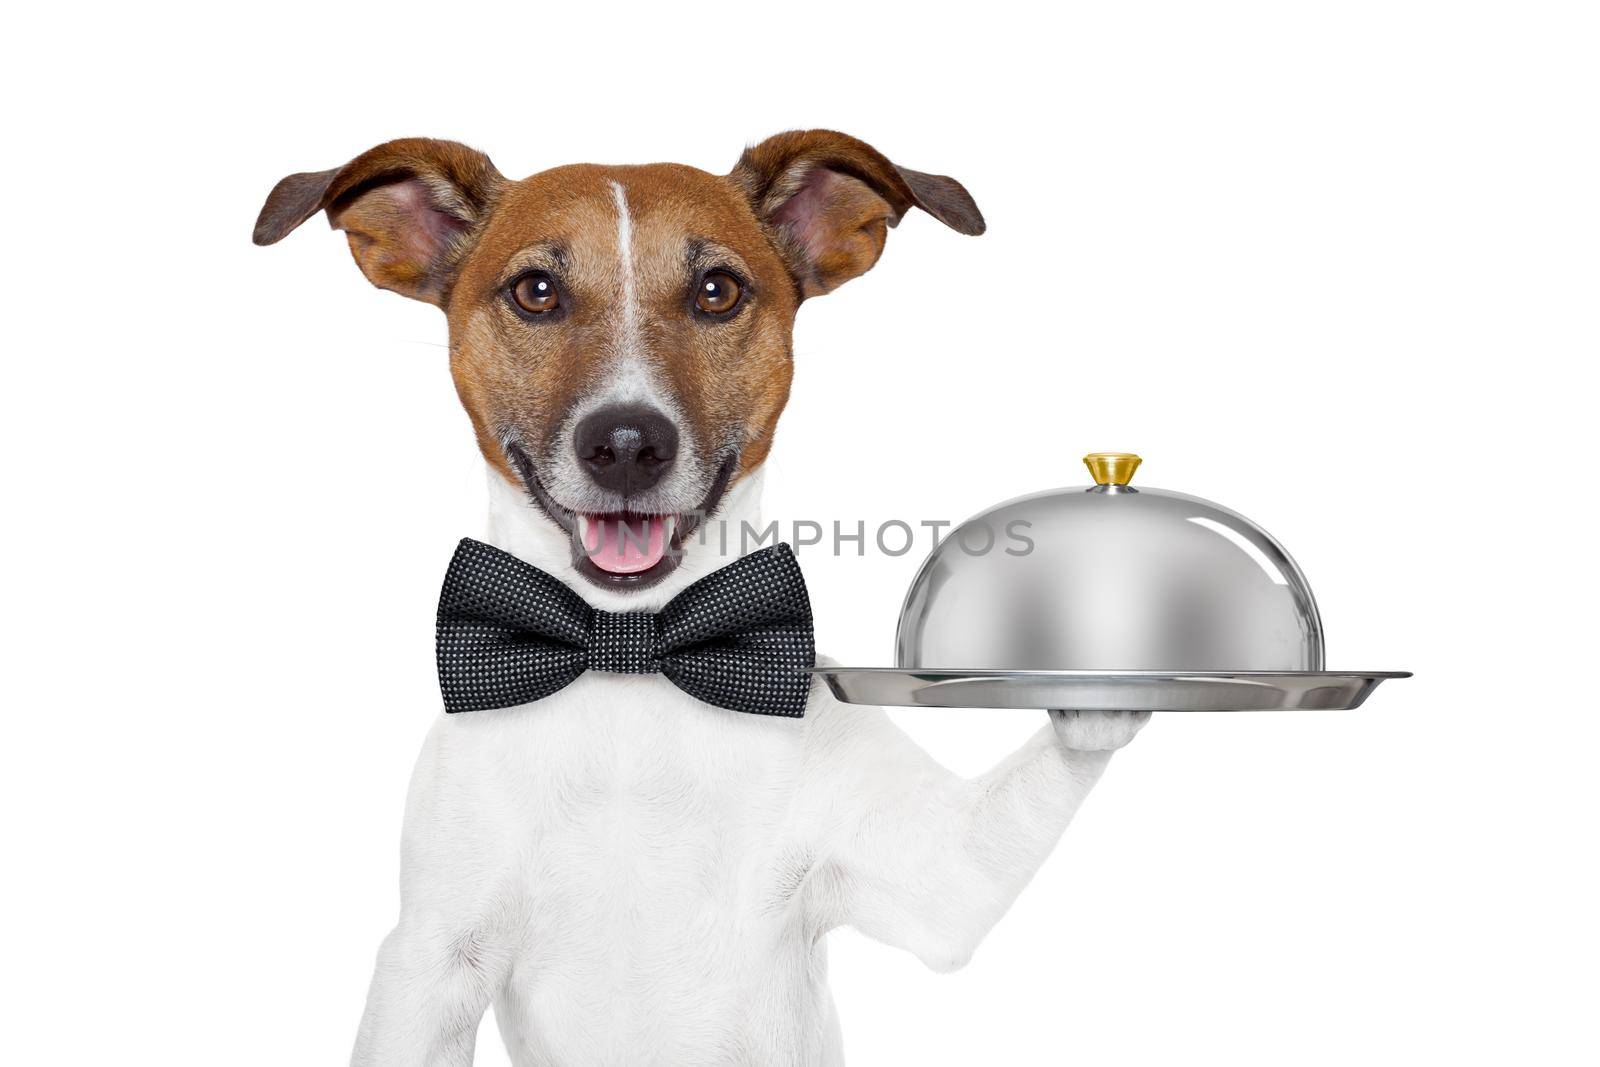 dog holding service tray and cover